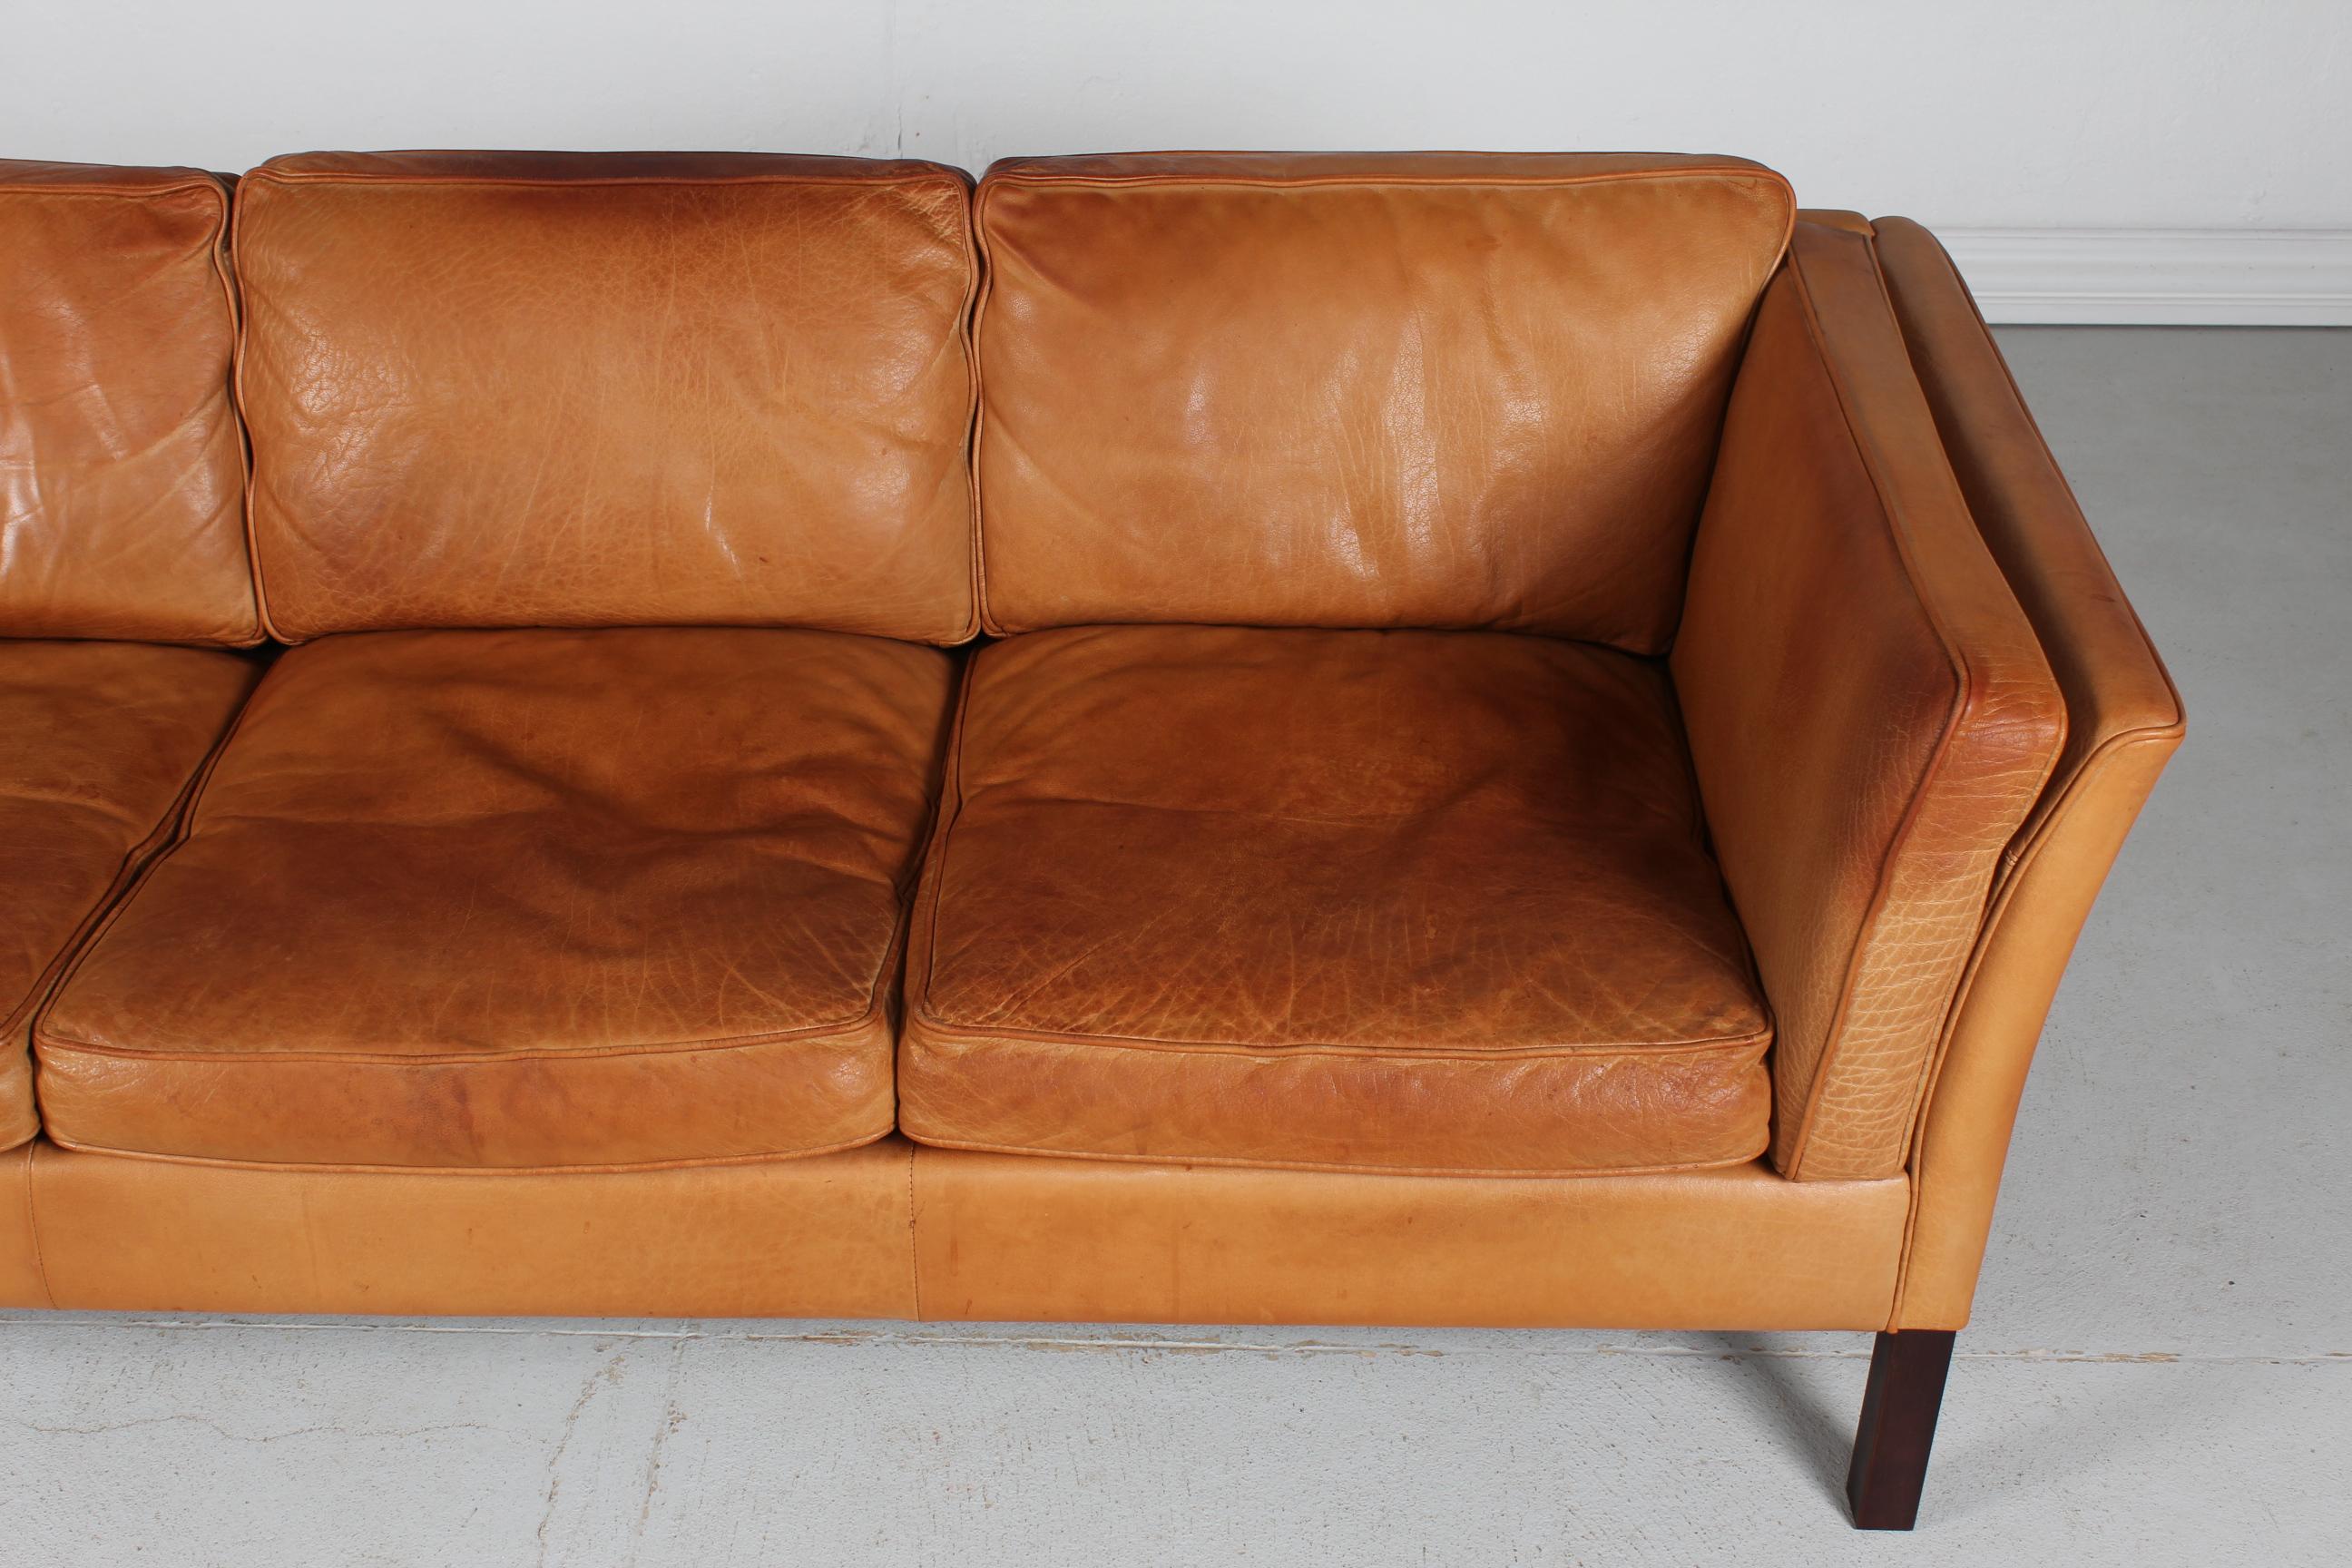 Danish Modern 3-Seat Sofa with Patinated Cognac-Colored Leather 1970s by Stouby 3